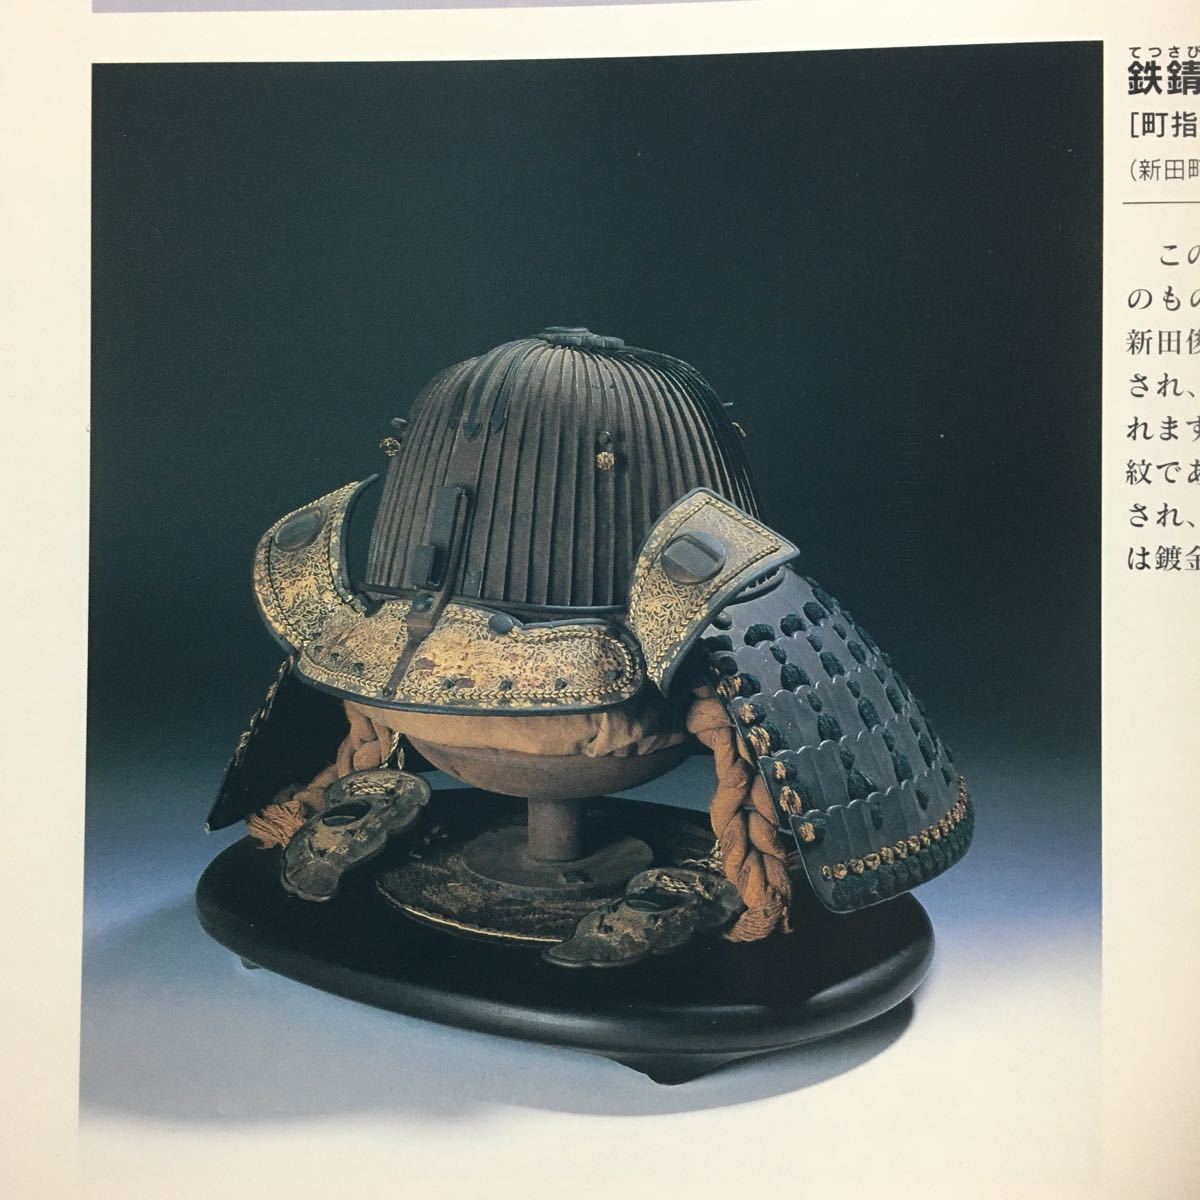 [ free shipping ] on . armour .. helmet . higashi wool .... armour armour exhibition * llustrated book pamphlet armour helmet higashi wool region six 10 two interval small star helmet present . armor . volume trunk circle ..